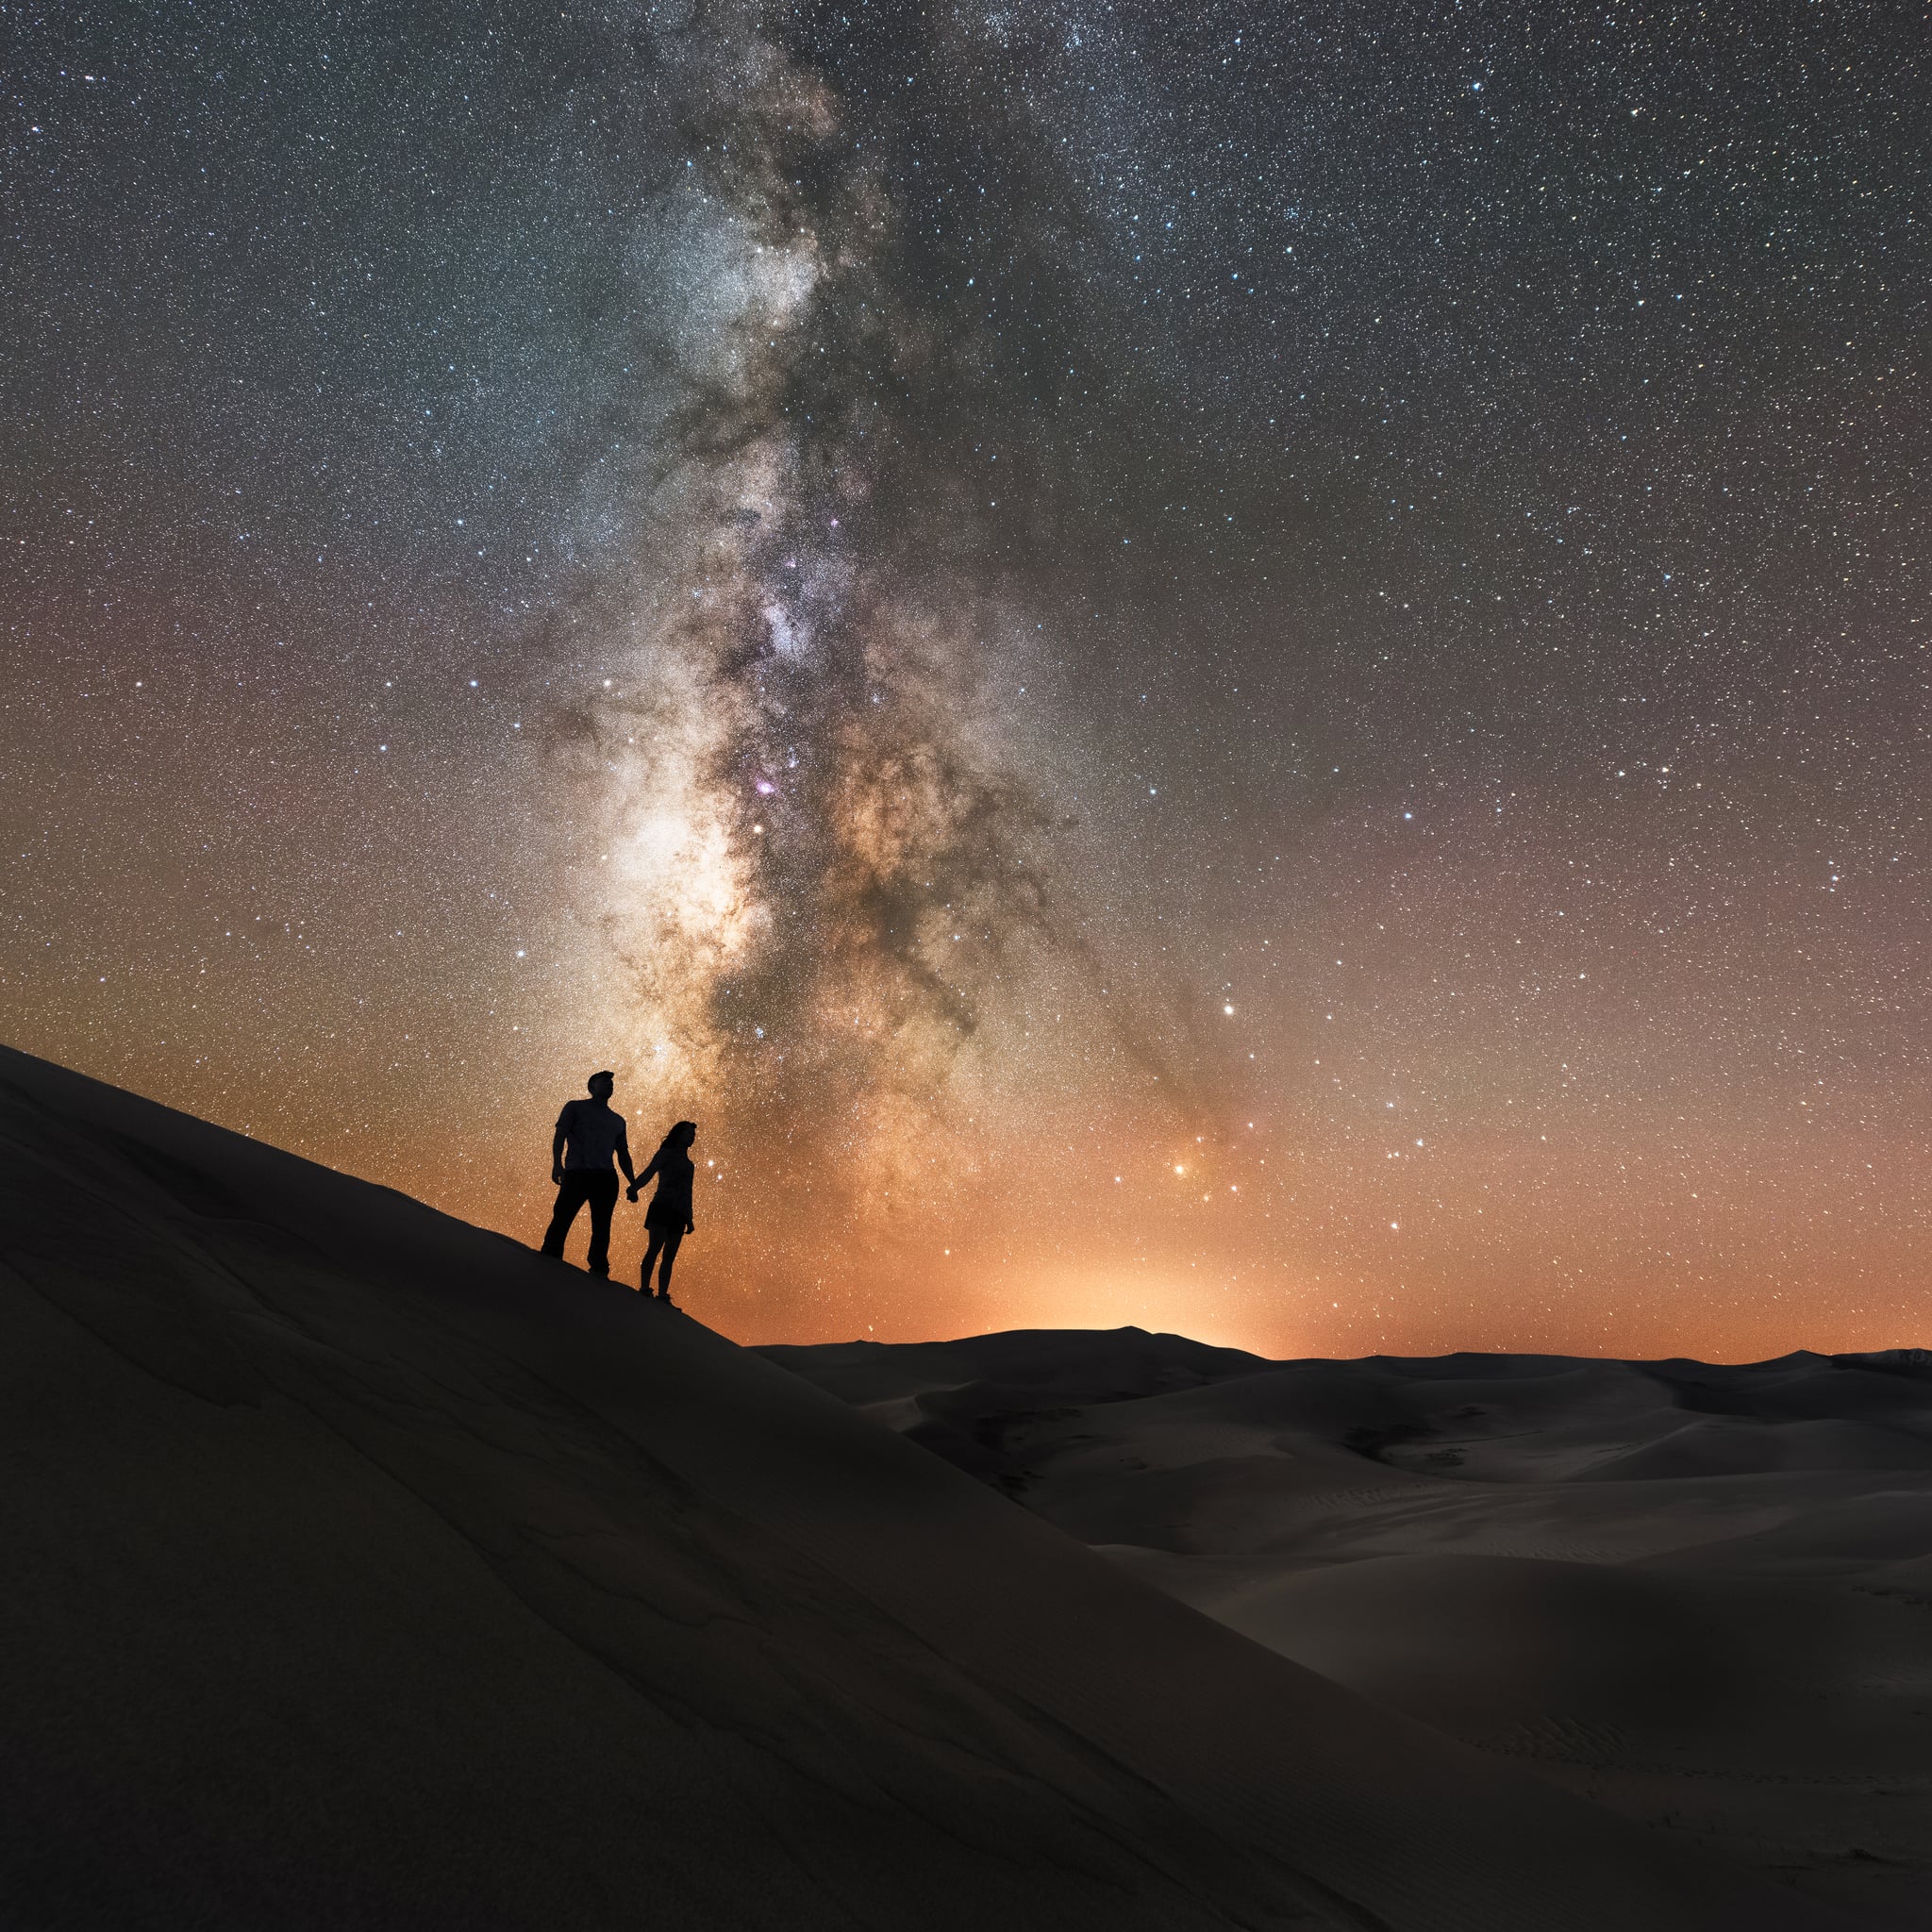 hikers on the peak of a mountain in front of the stars representing venus in aquarius